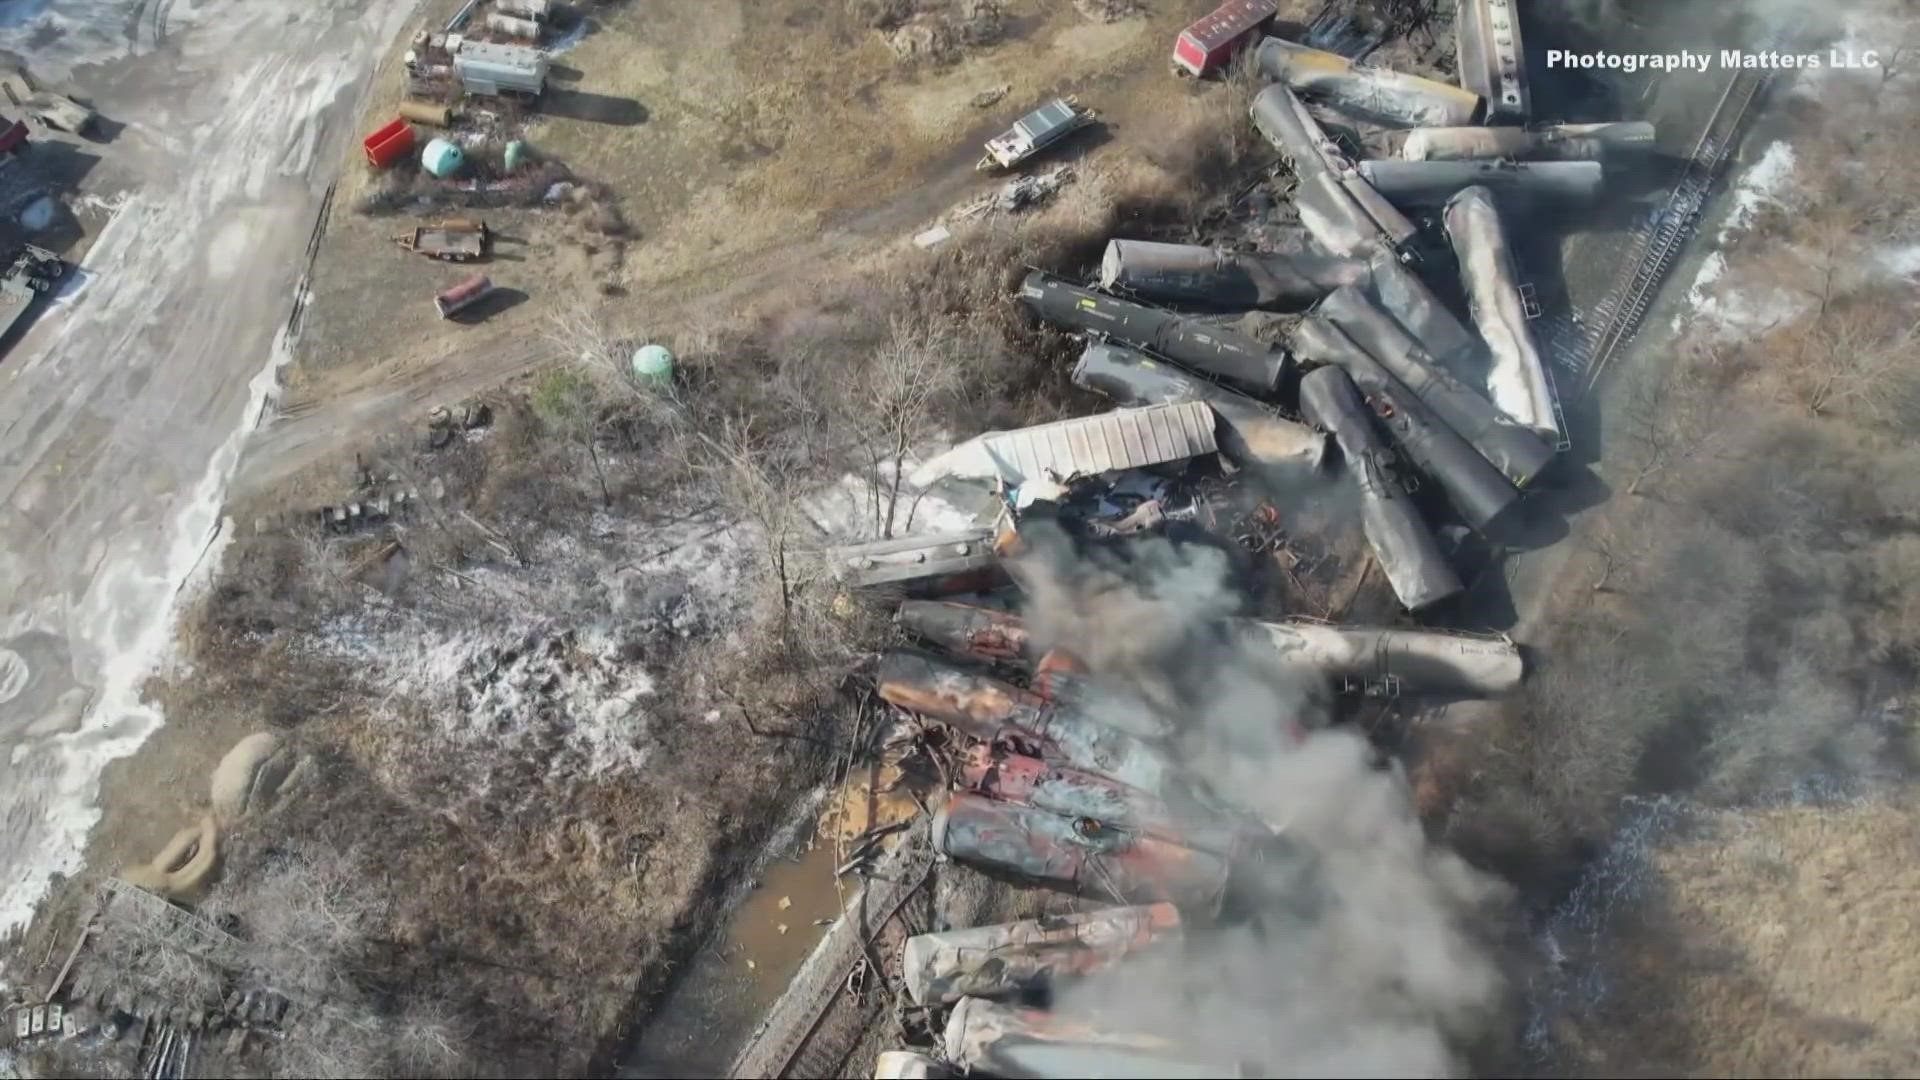 Air quality tests from the site of the train derailment in East Palestine has been underway.